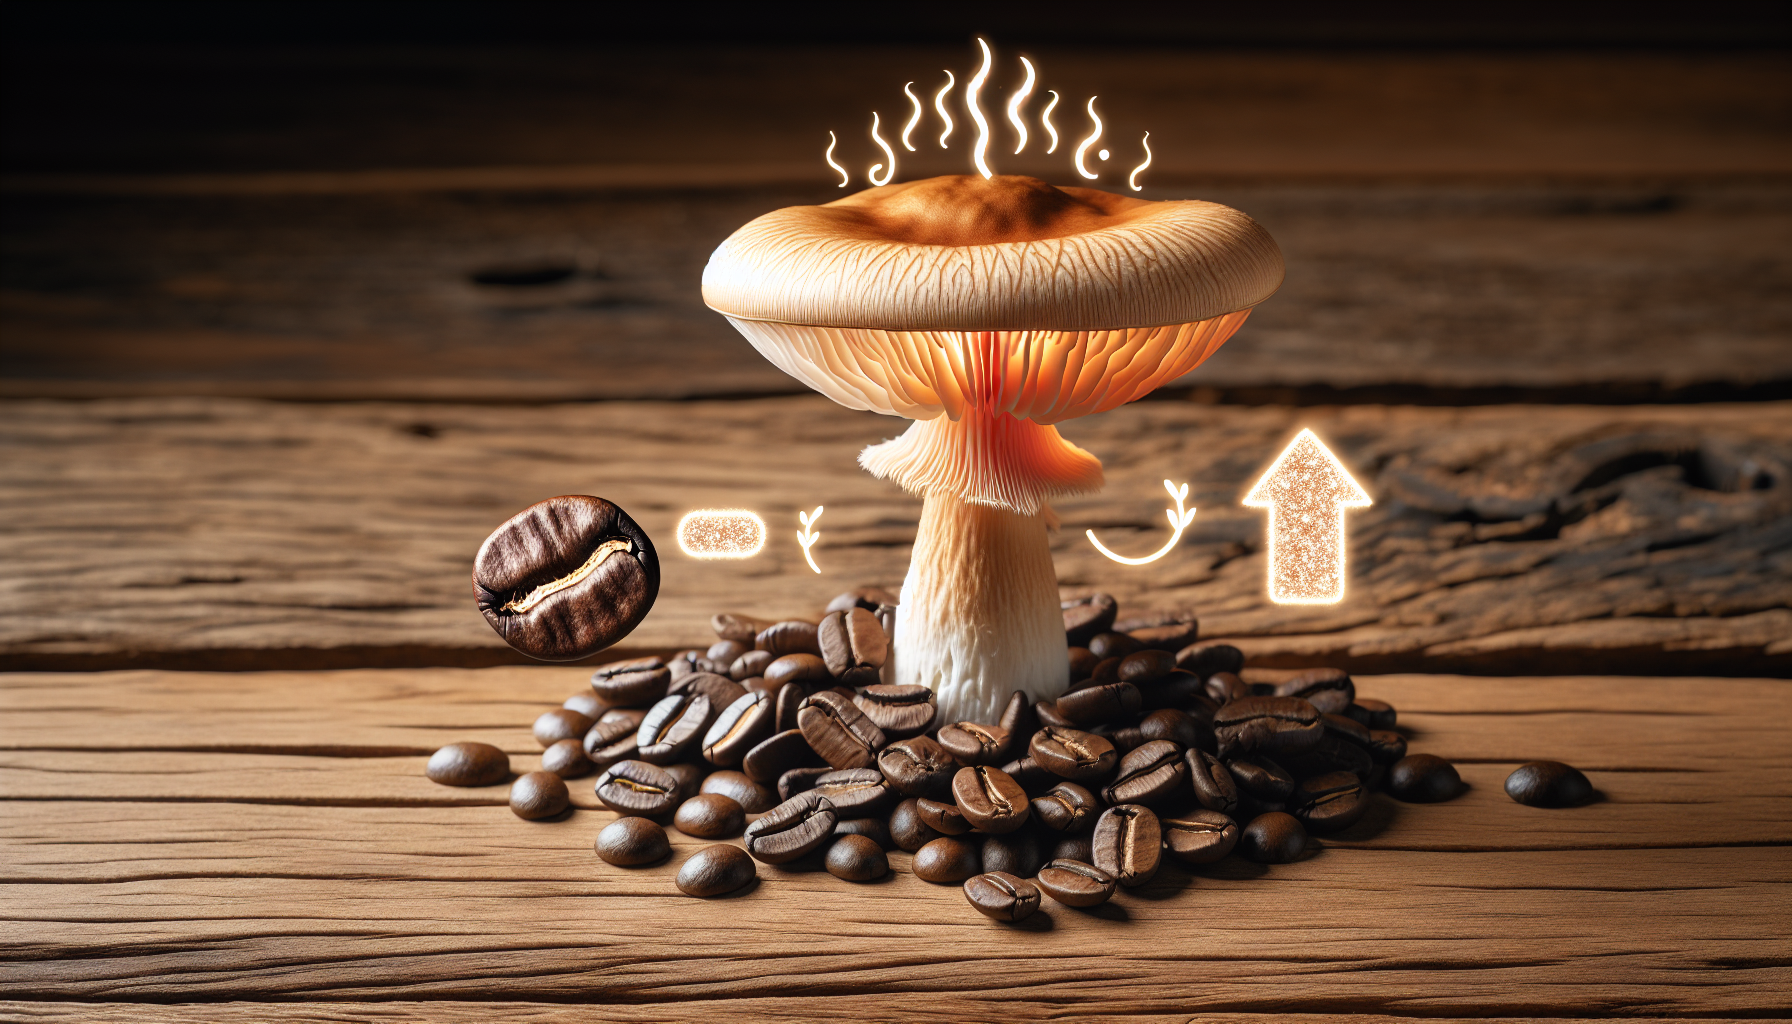 Comparison of coffee beans and lion's mane mushroom